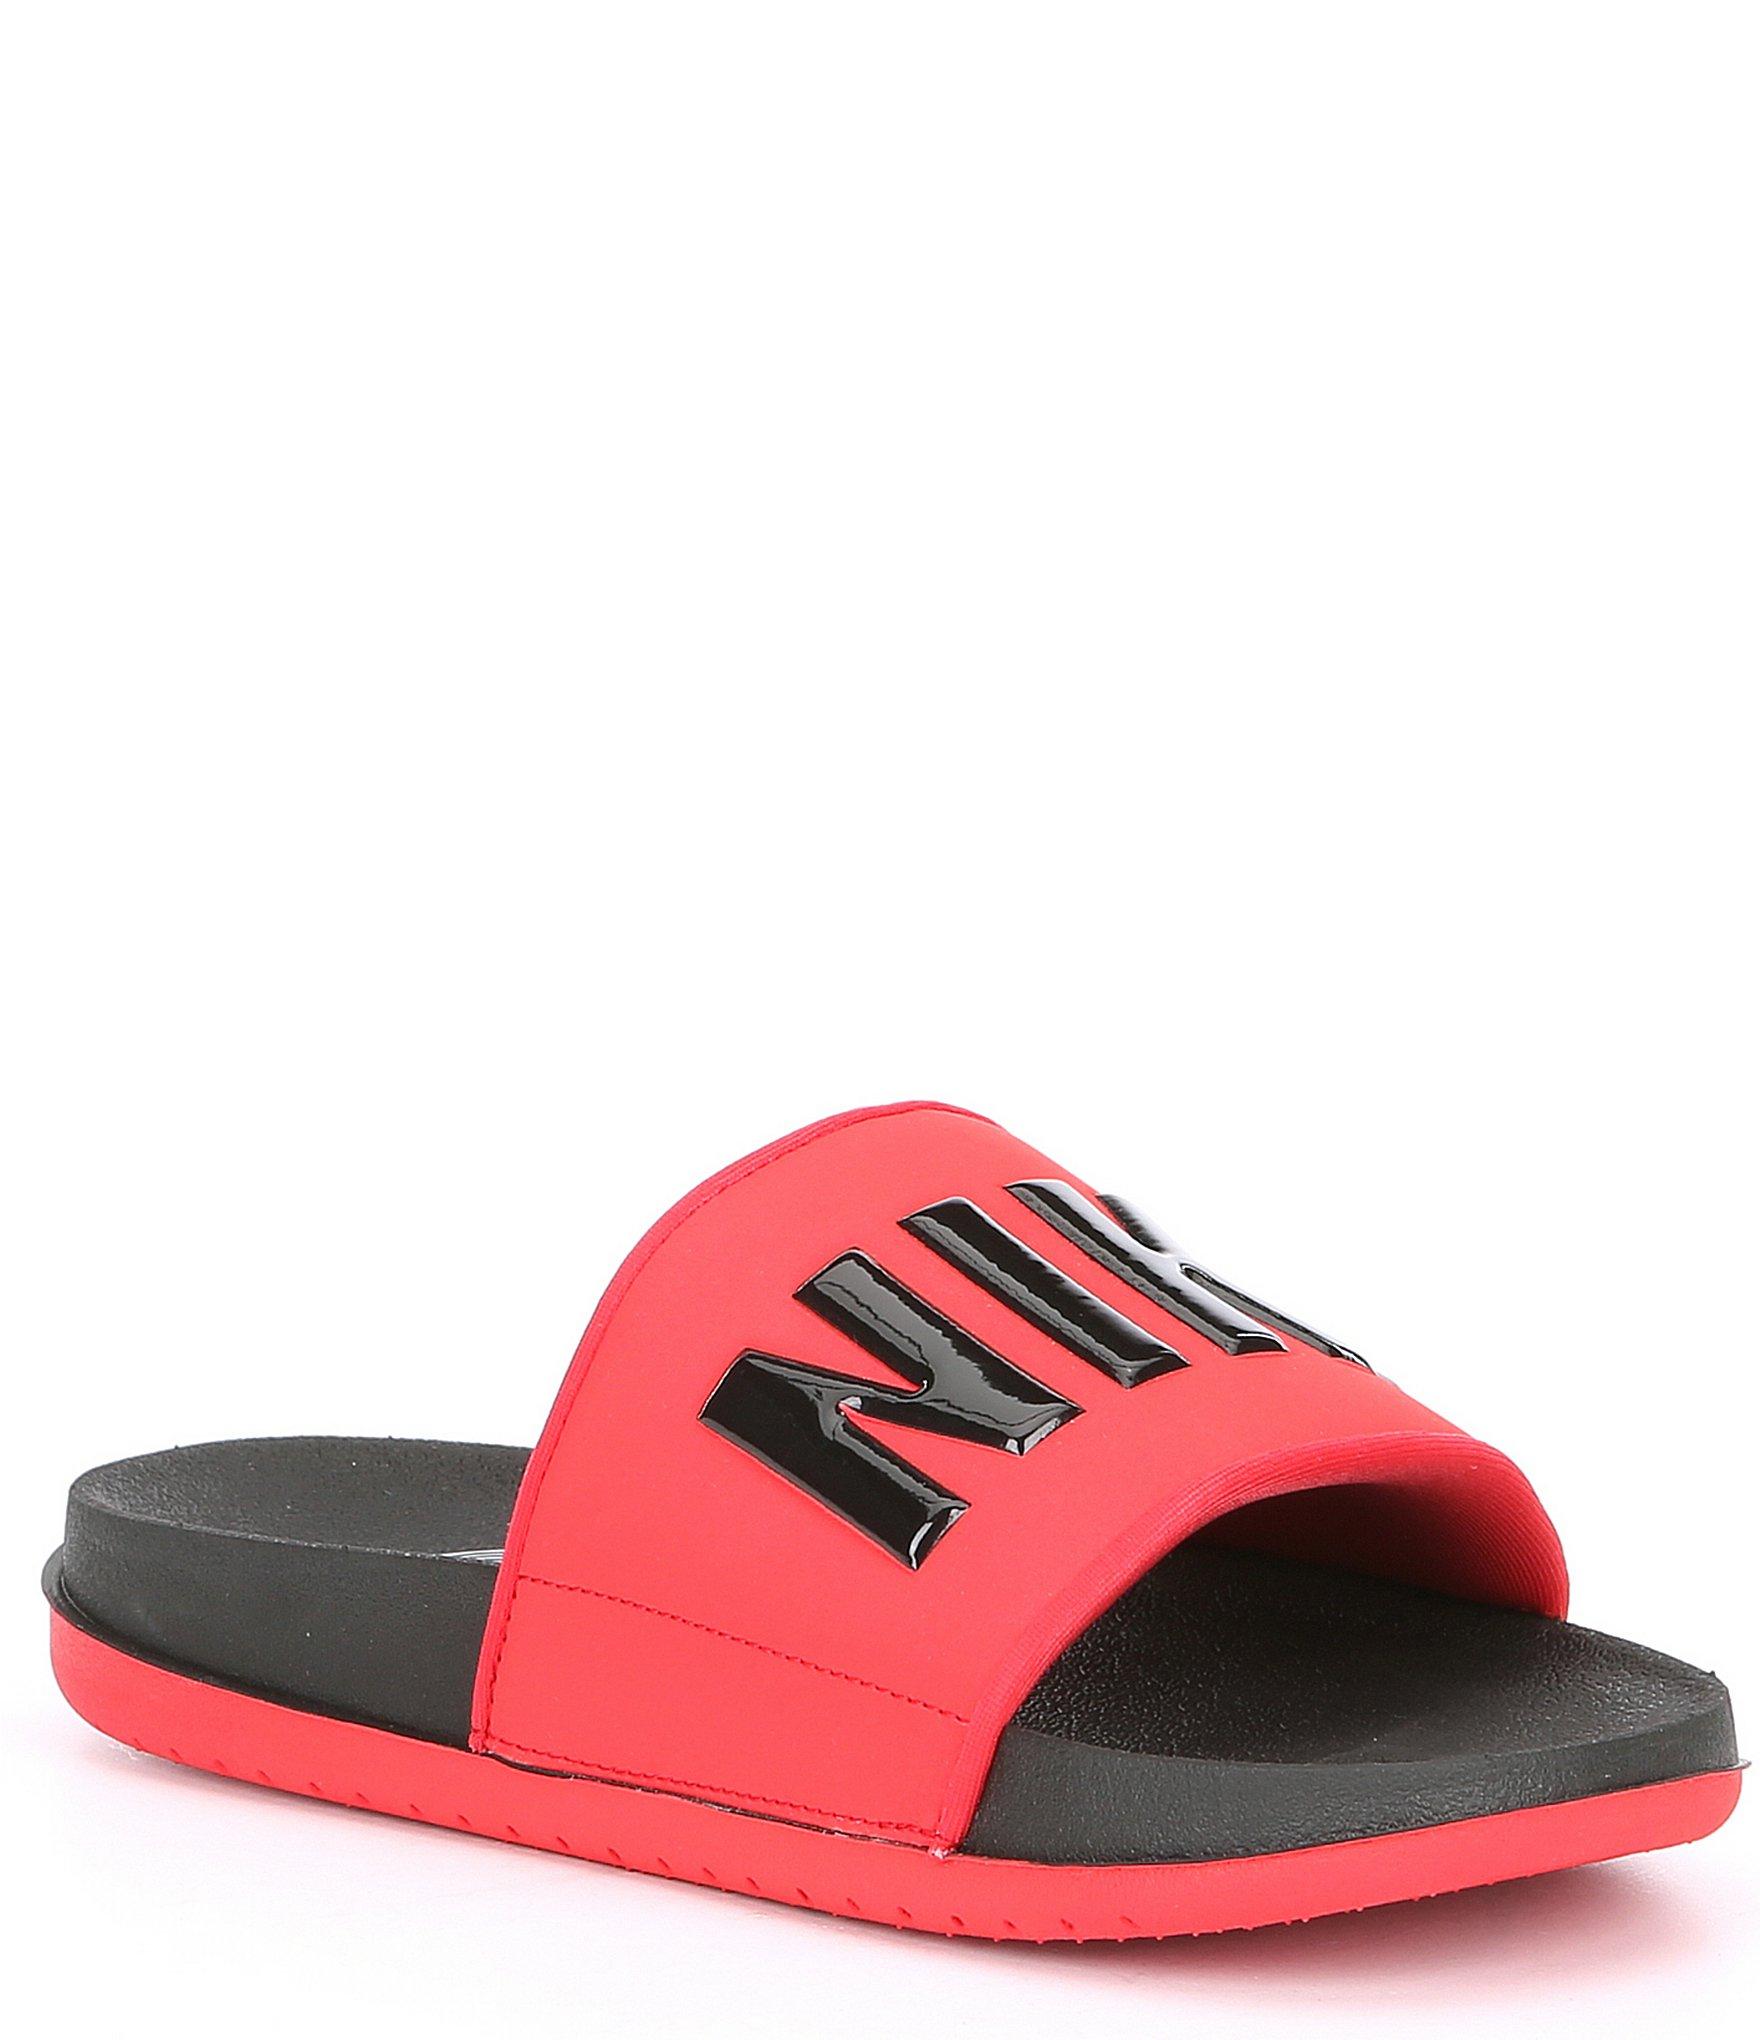 mens red nike sandals